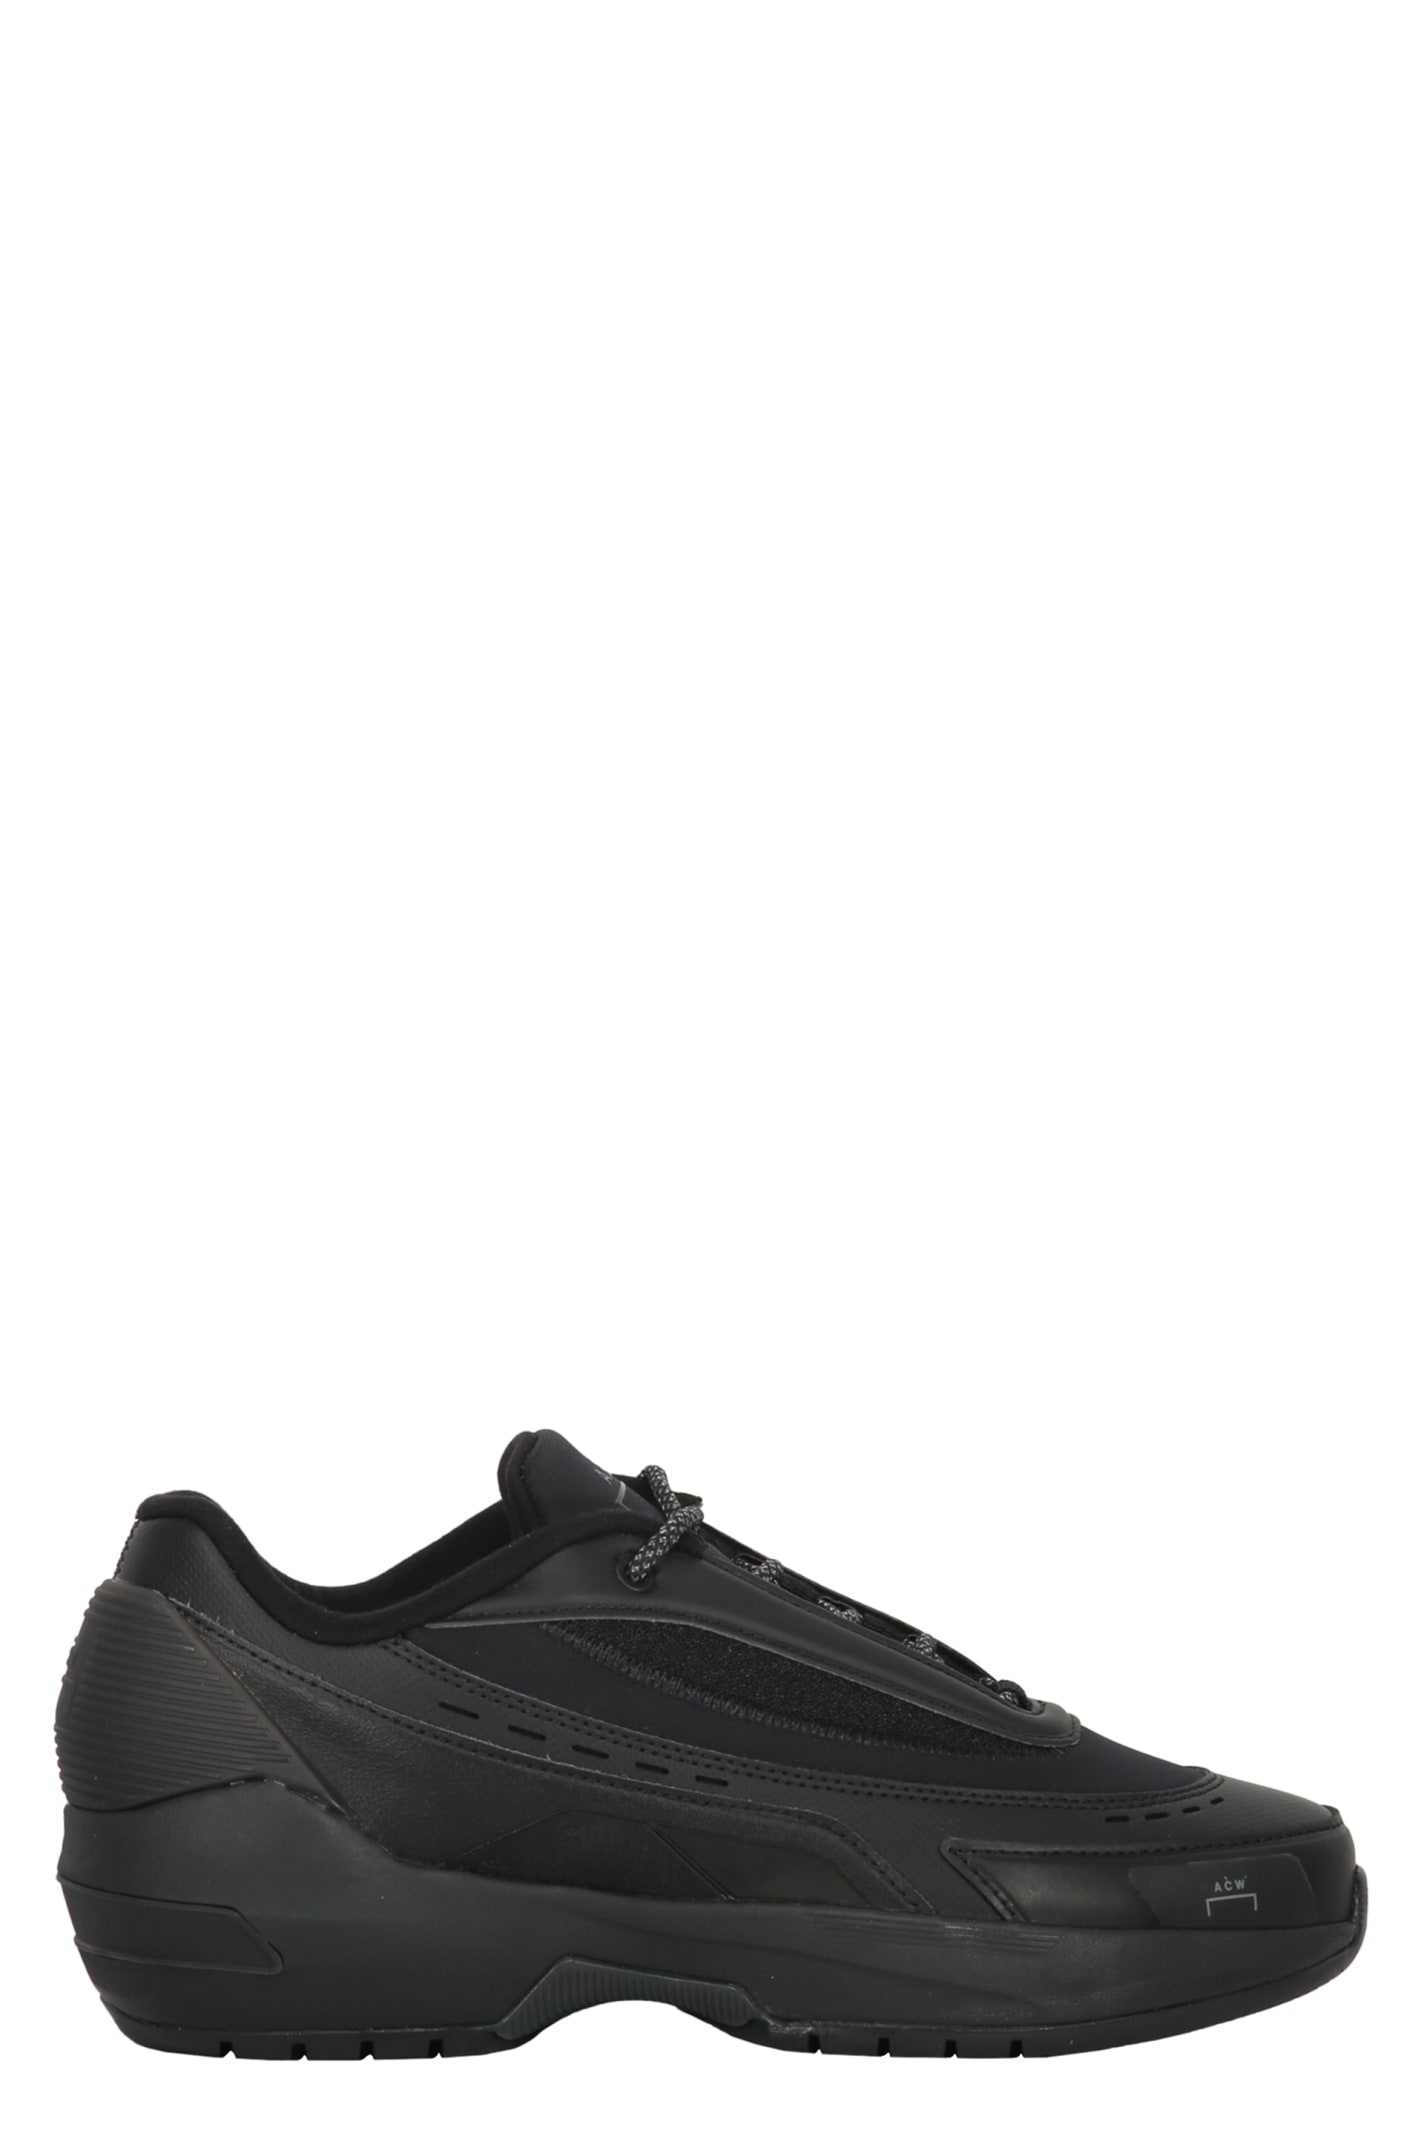 A-cold-wall* Low-top Sneakers In Black